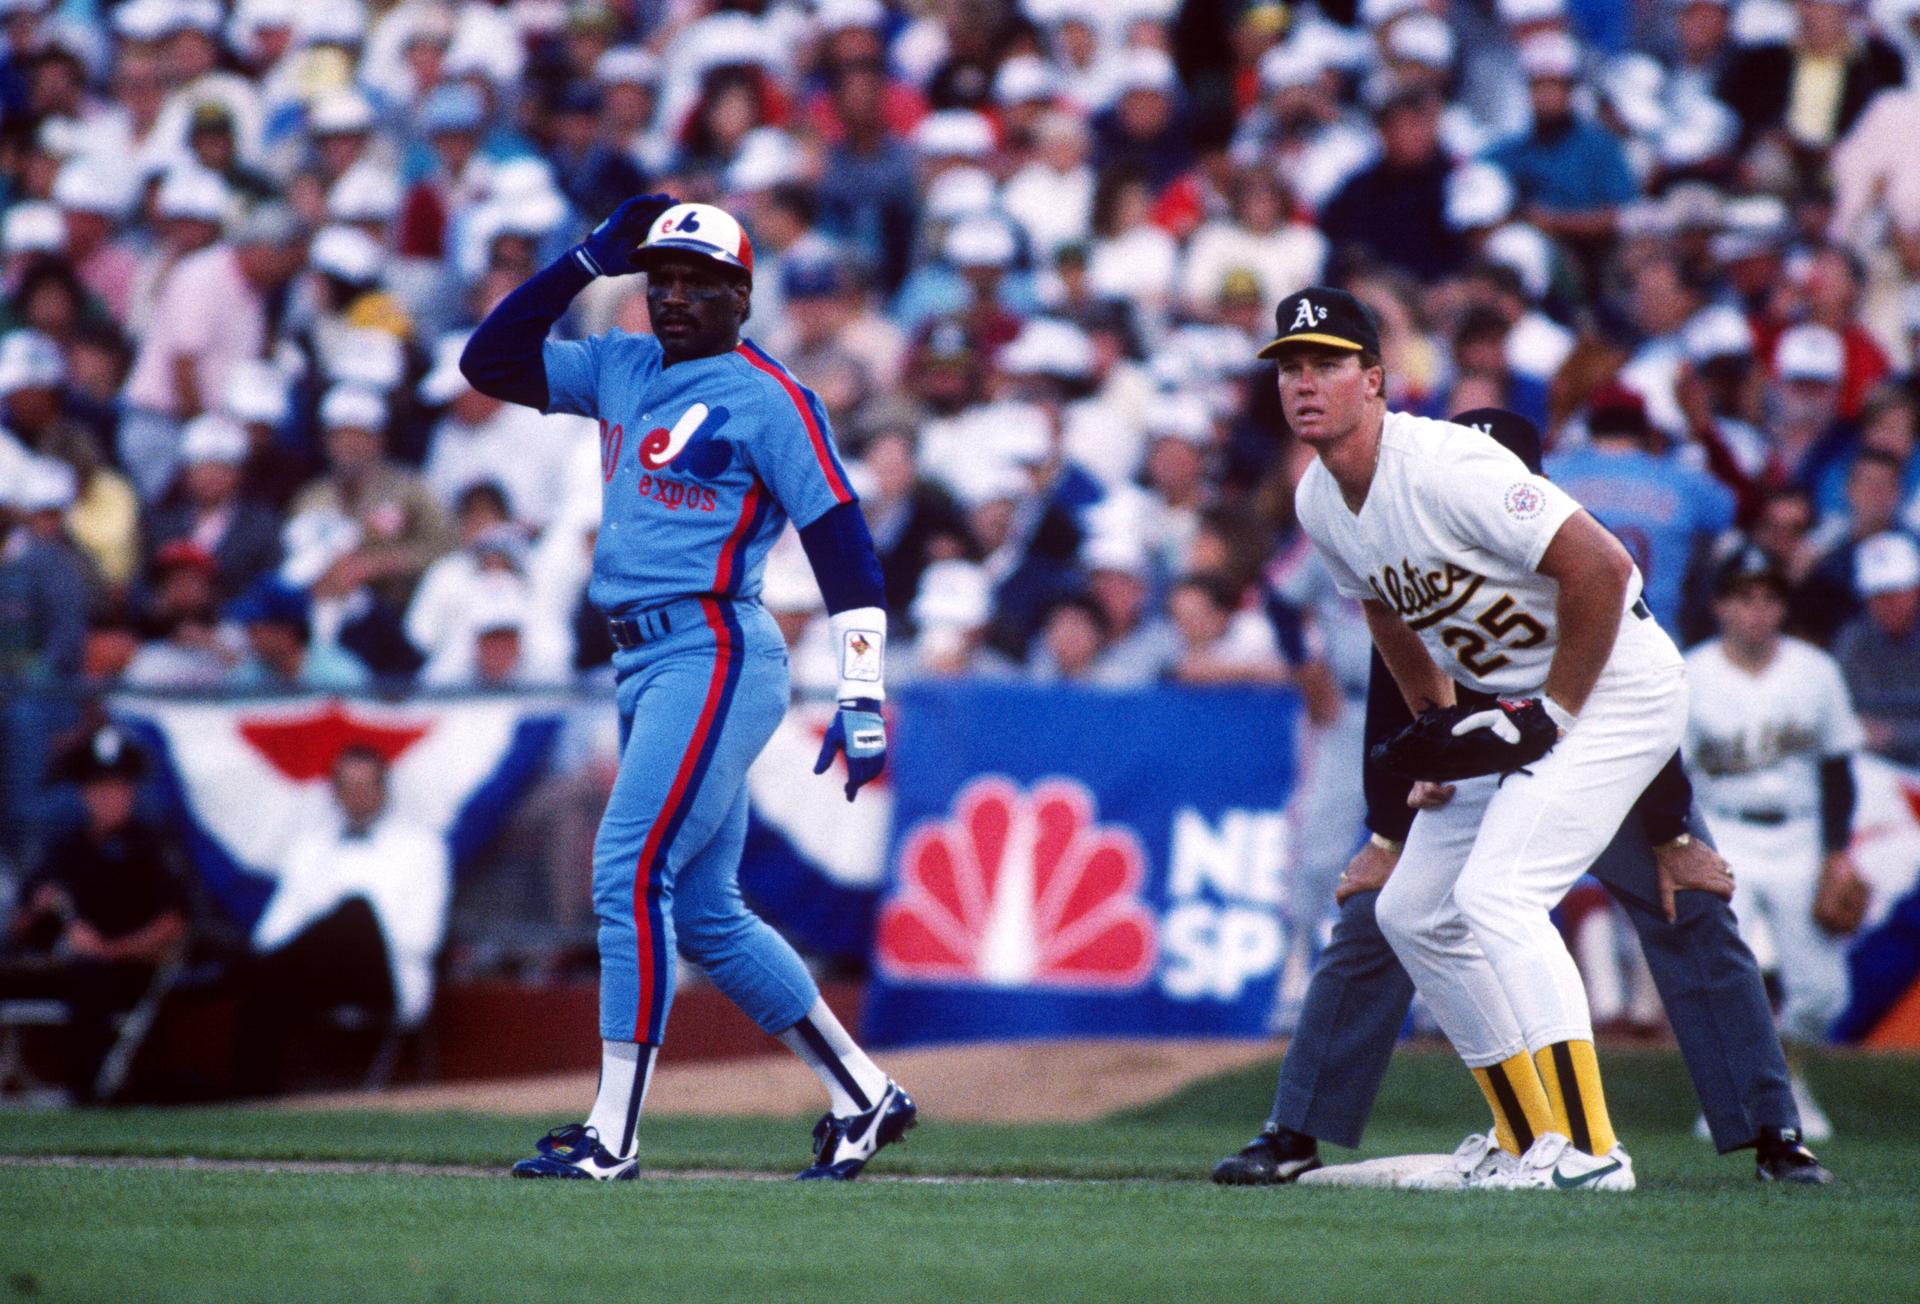 Tim Raines and Mark McGwire at the 1987 MLB All-Star Game